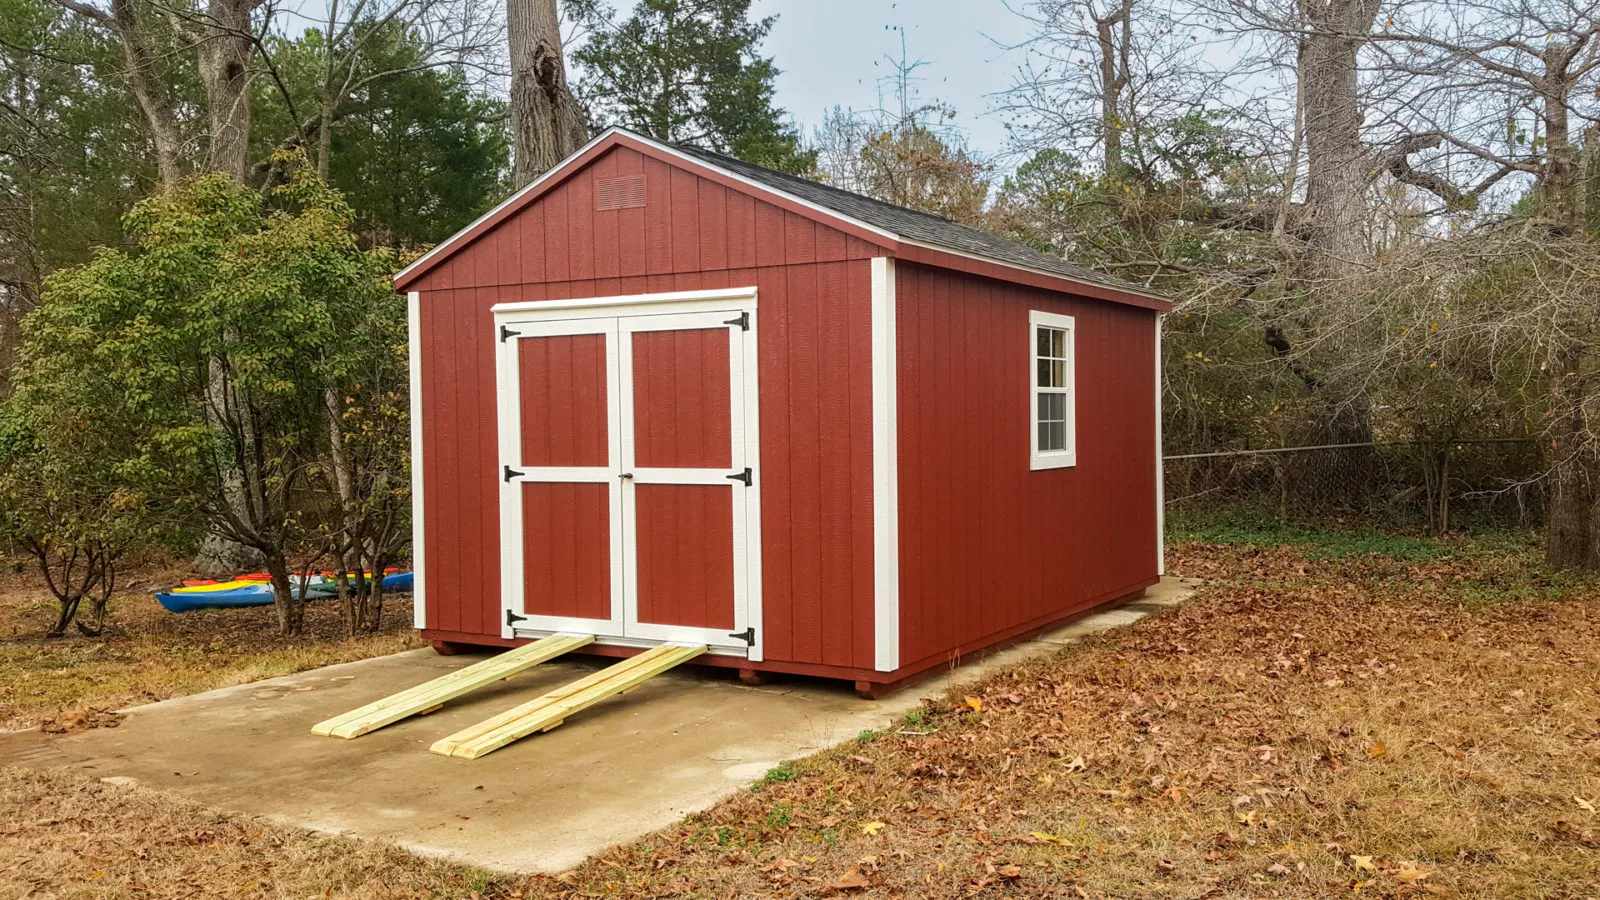 exterior of red and white pre-built storage shed for sale near woods